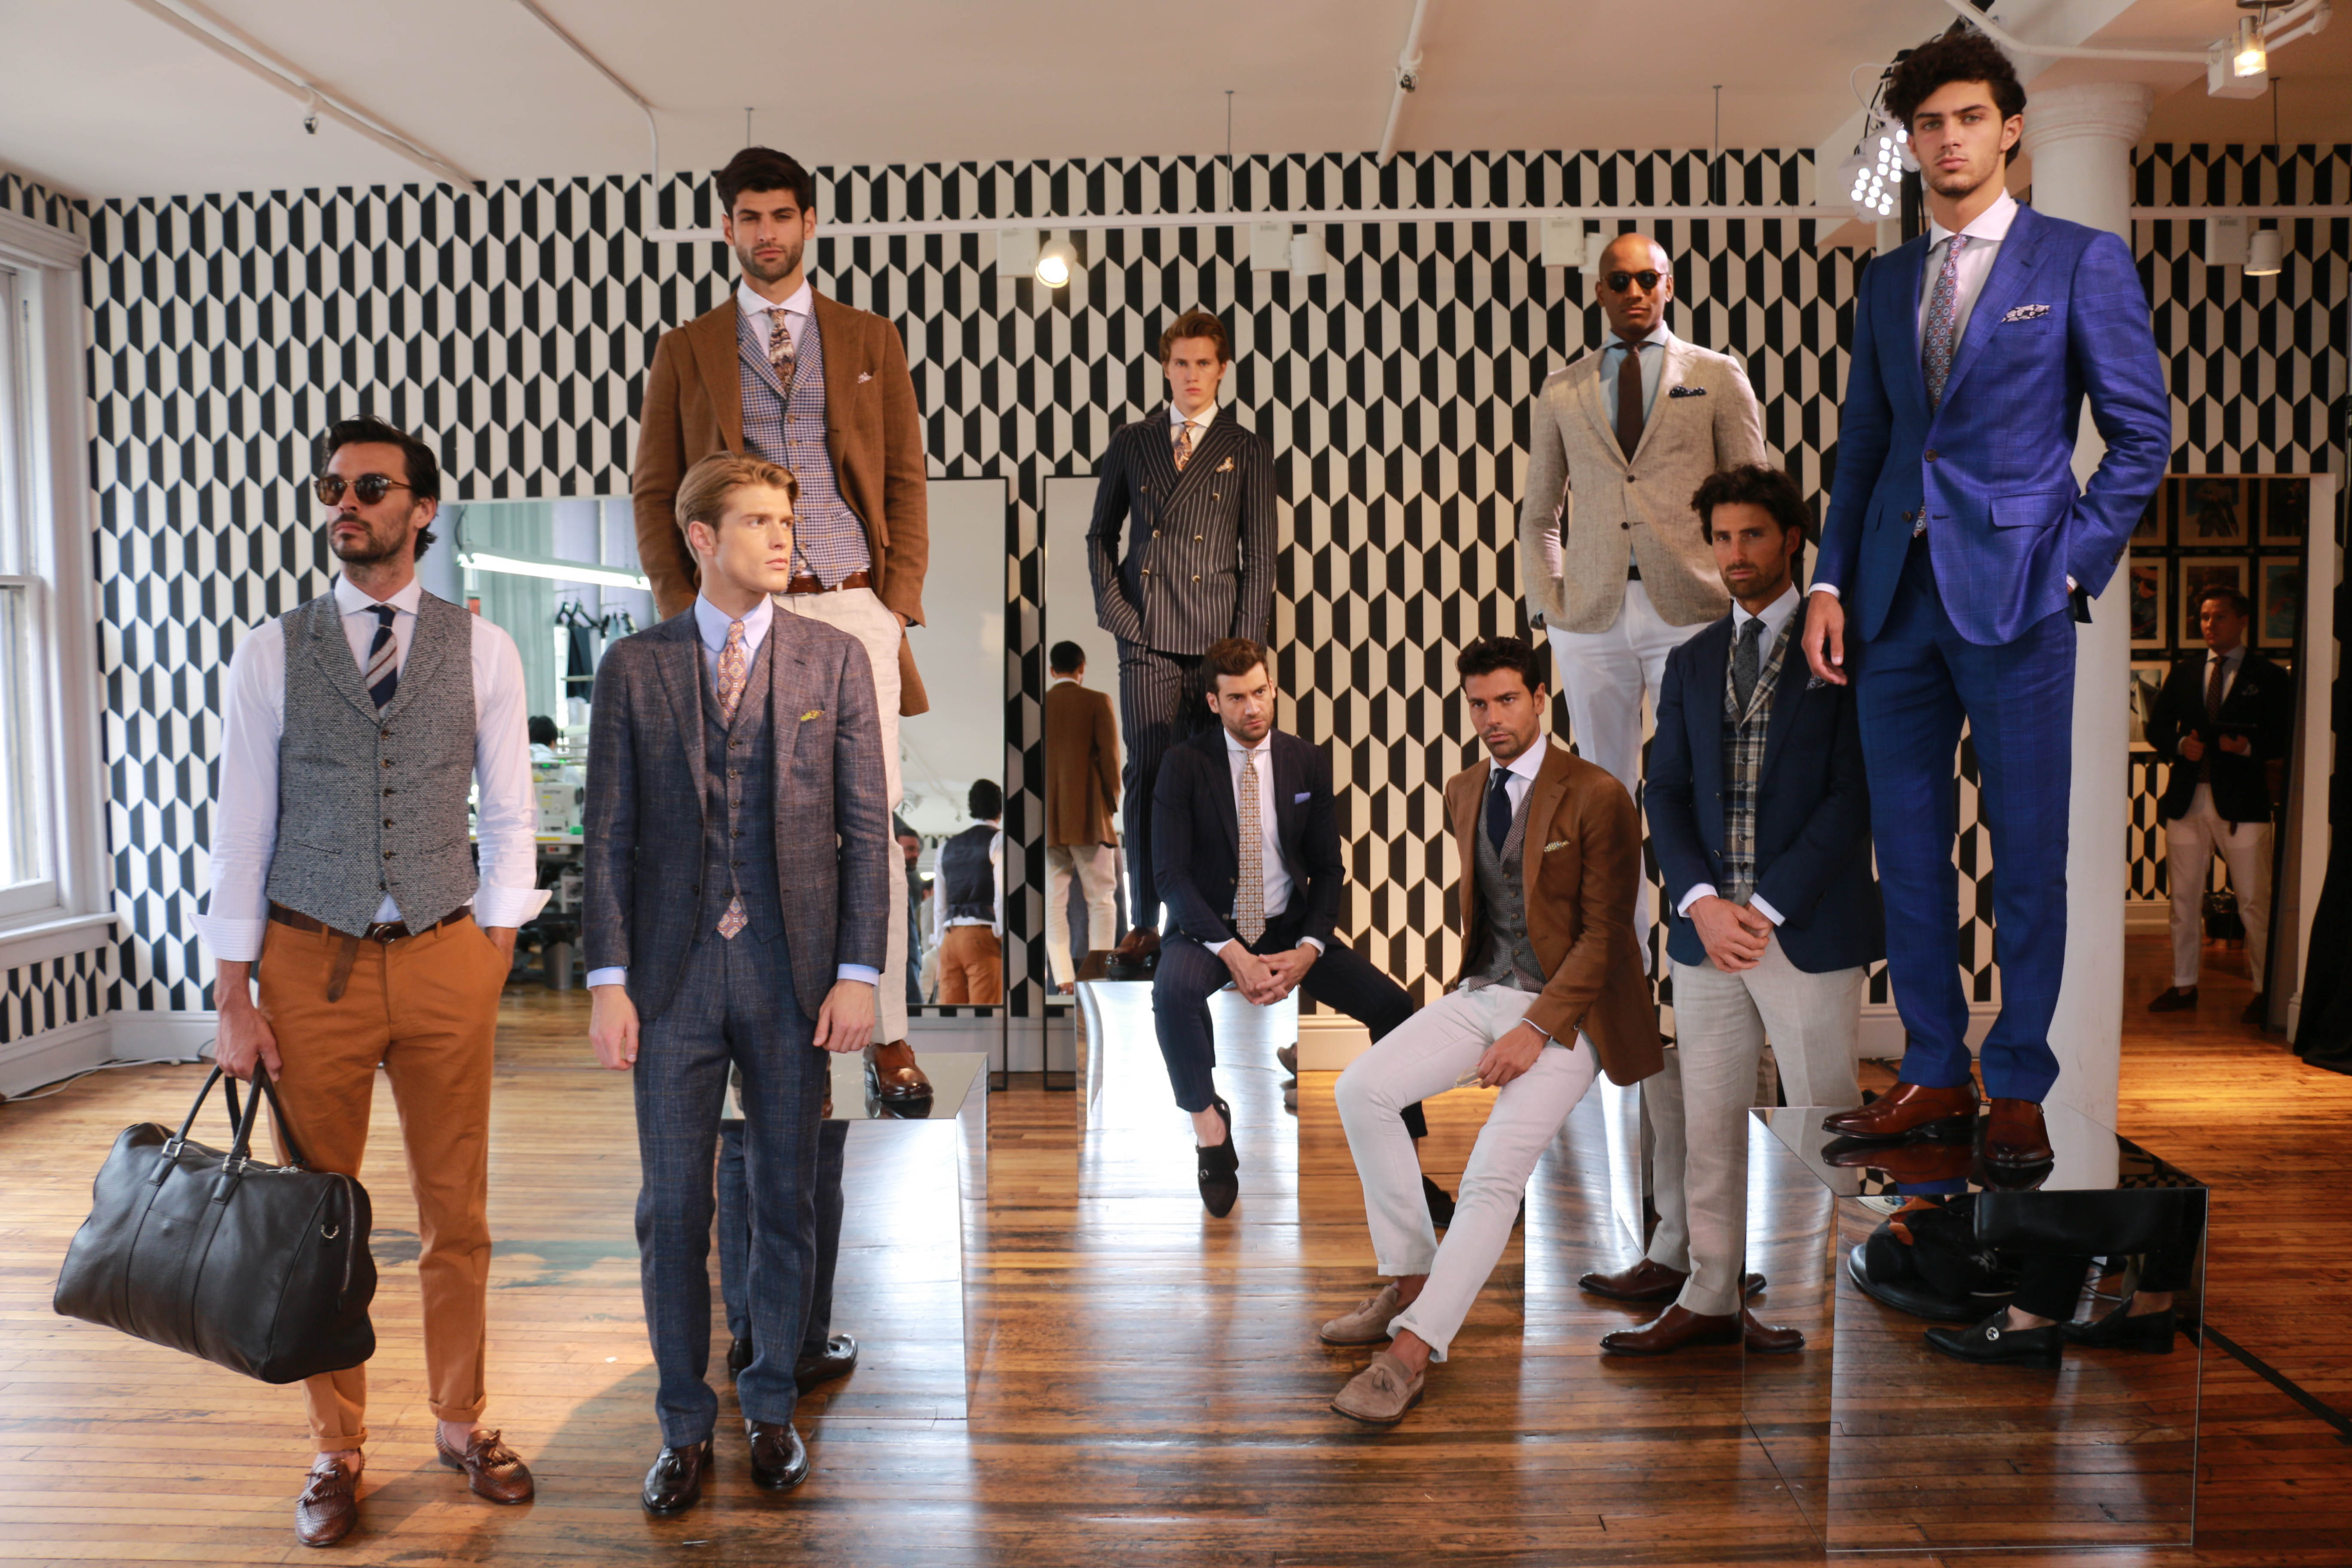 London Fashion Week Men’s: What We Know - Discerning Gent